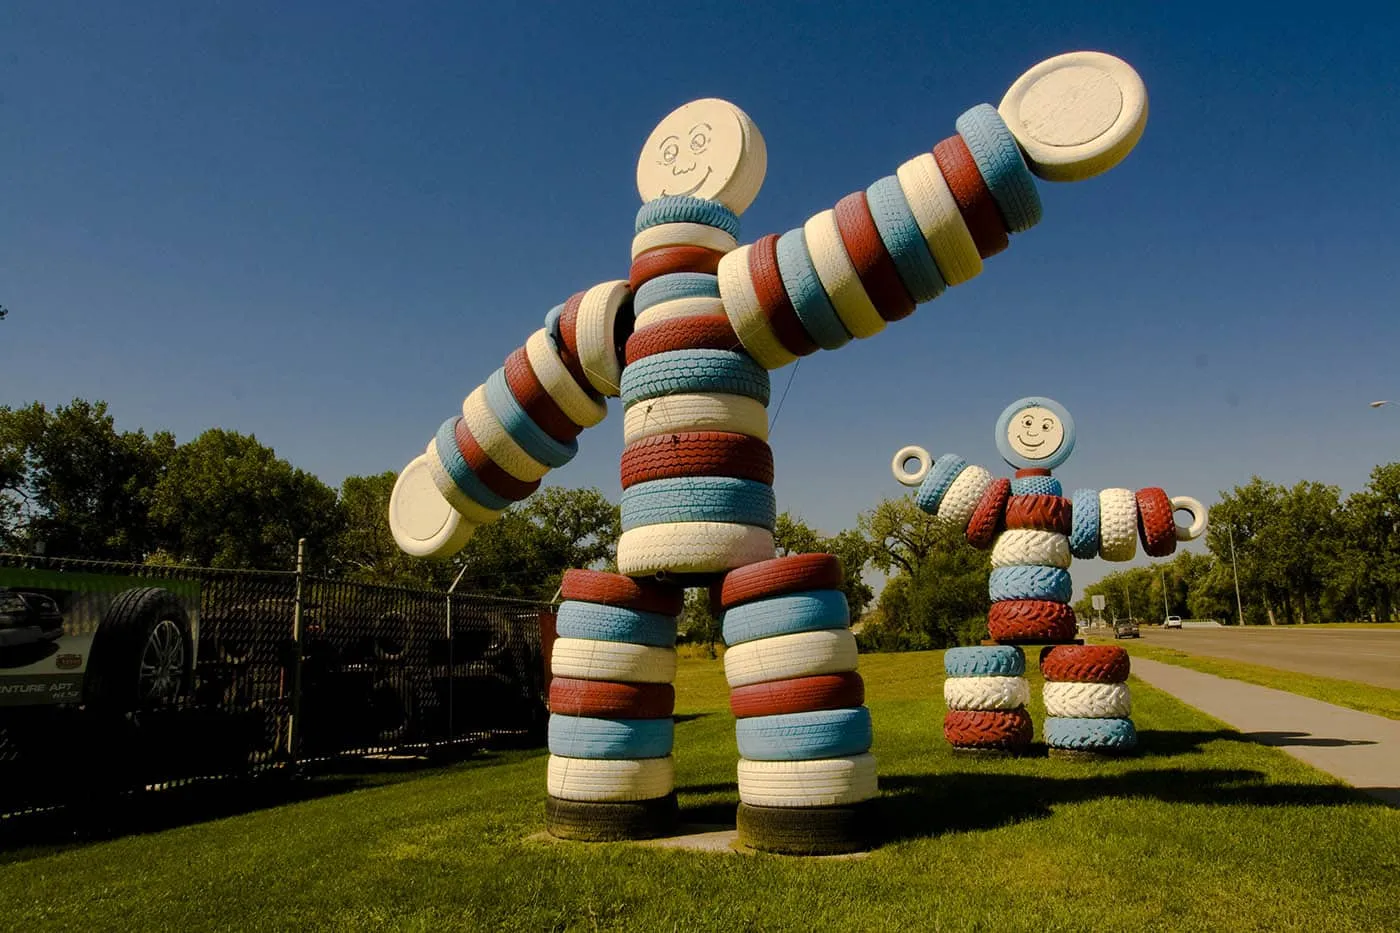 Men made from tires, a roadside attraction in Rapid City, South Dakota